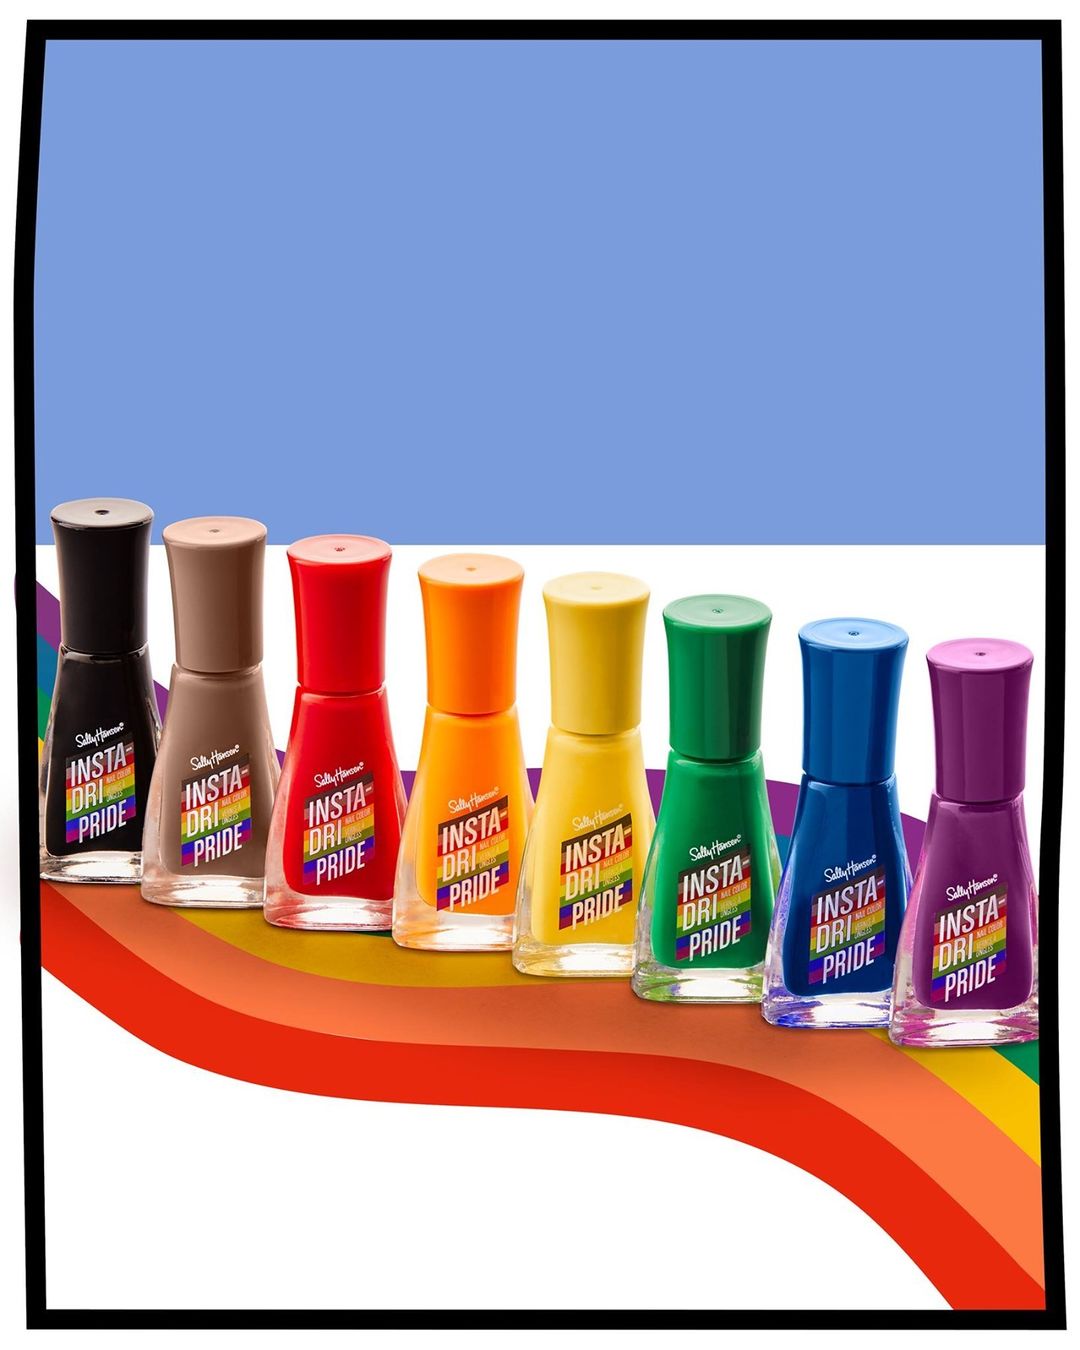 Sally Hansen Partners with GLAAD to Launch Pride-Themed Nail Polish Set